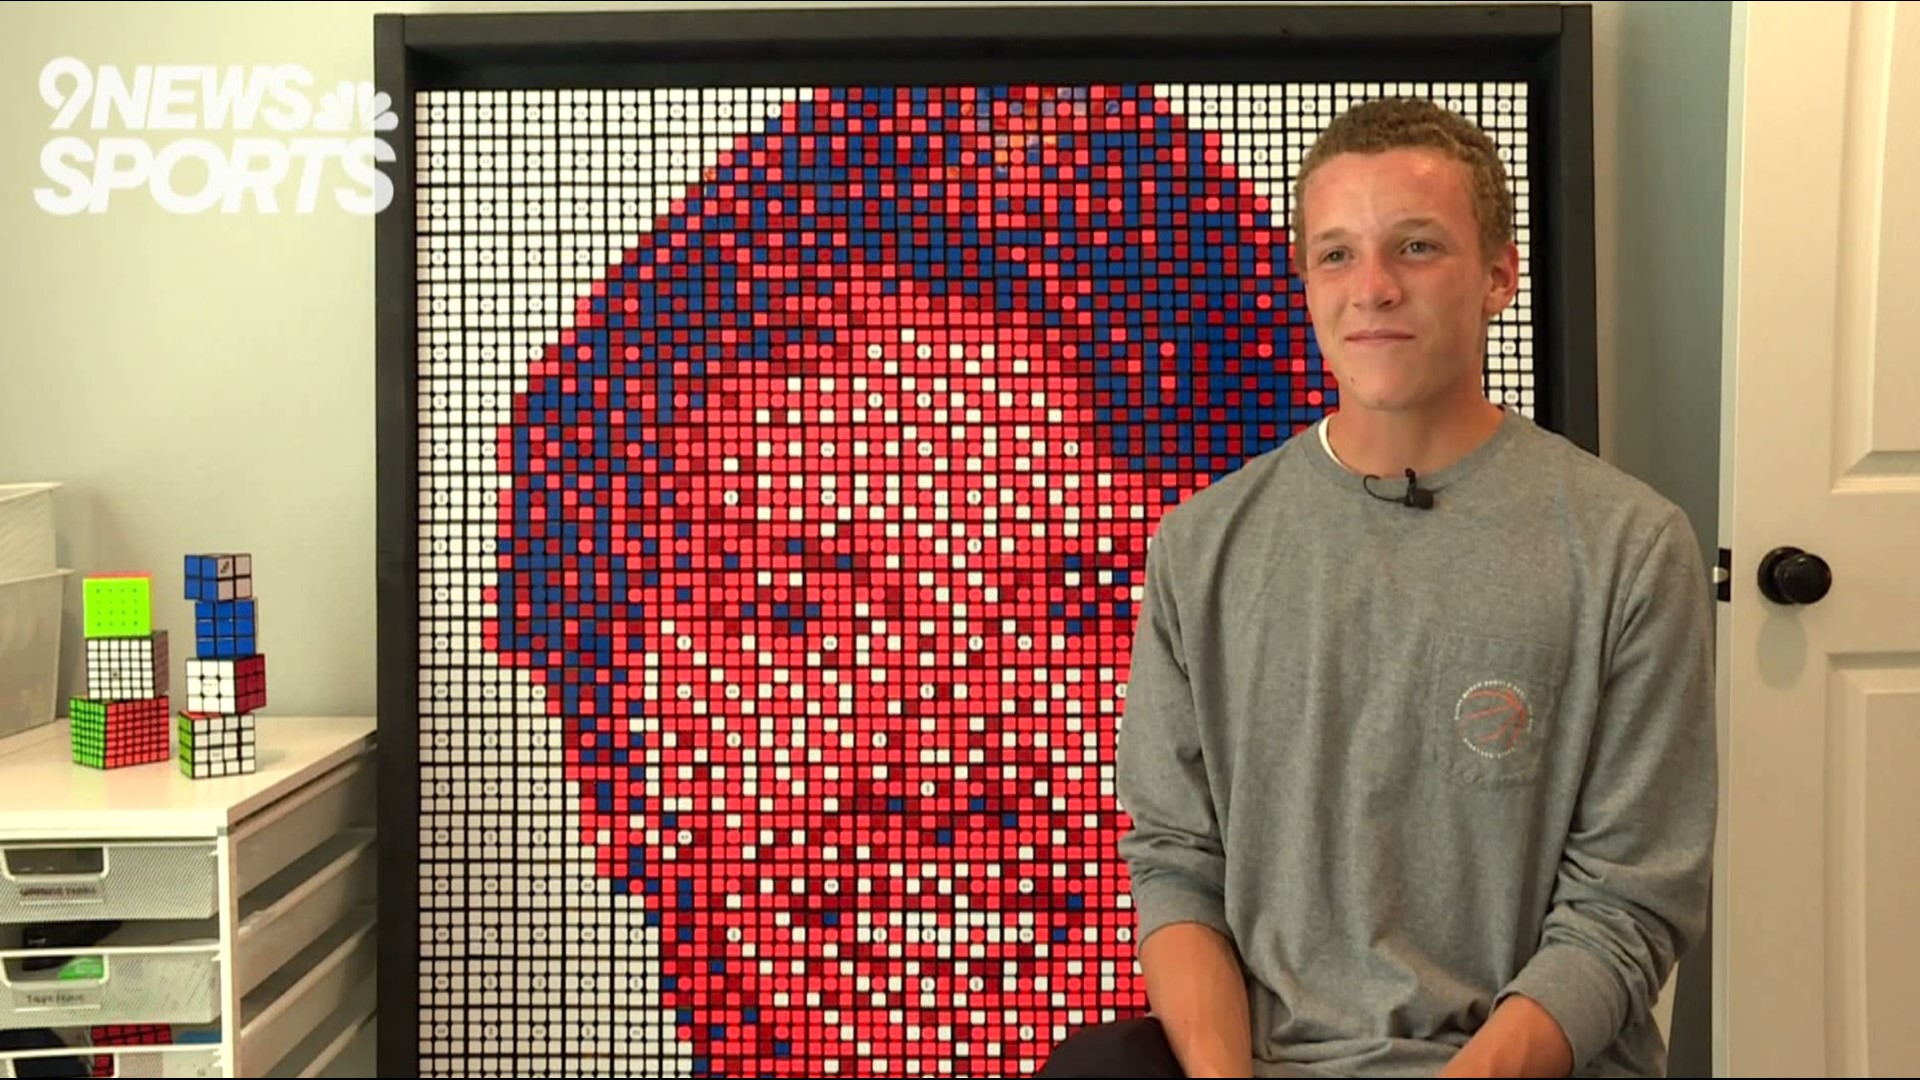 William McDavid is a three-sport athlete at Cherry Creek High School, and a remarkable artist with Rubik's Cubes.